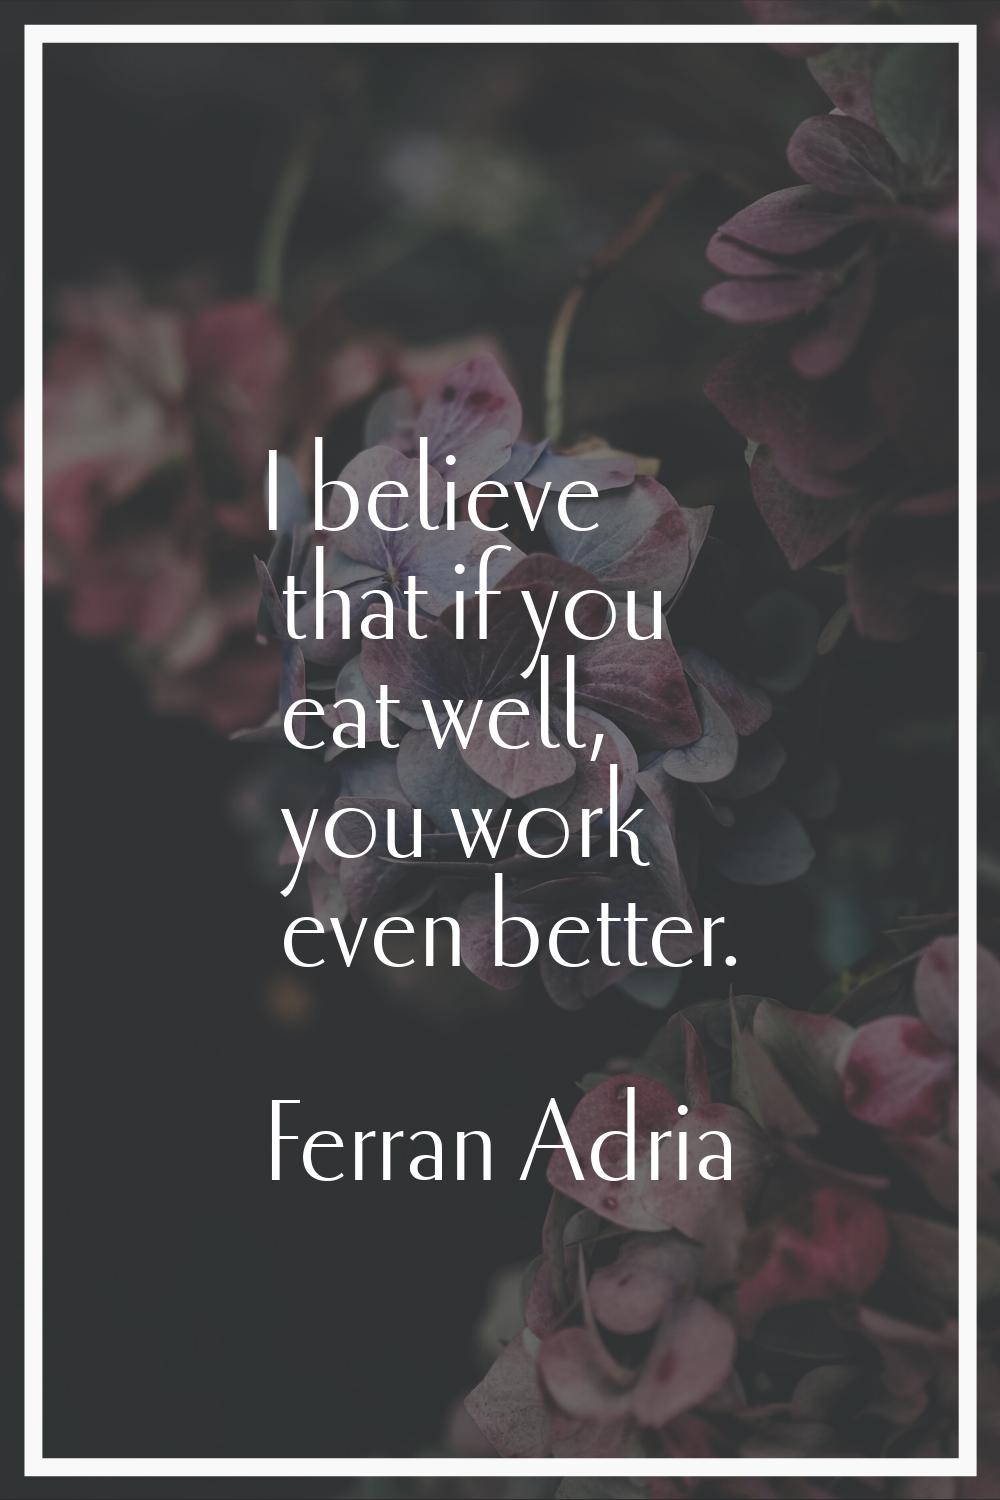 I believe that if you eat well, you work even better.